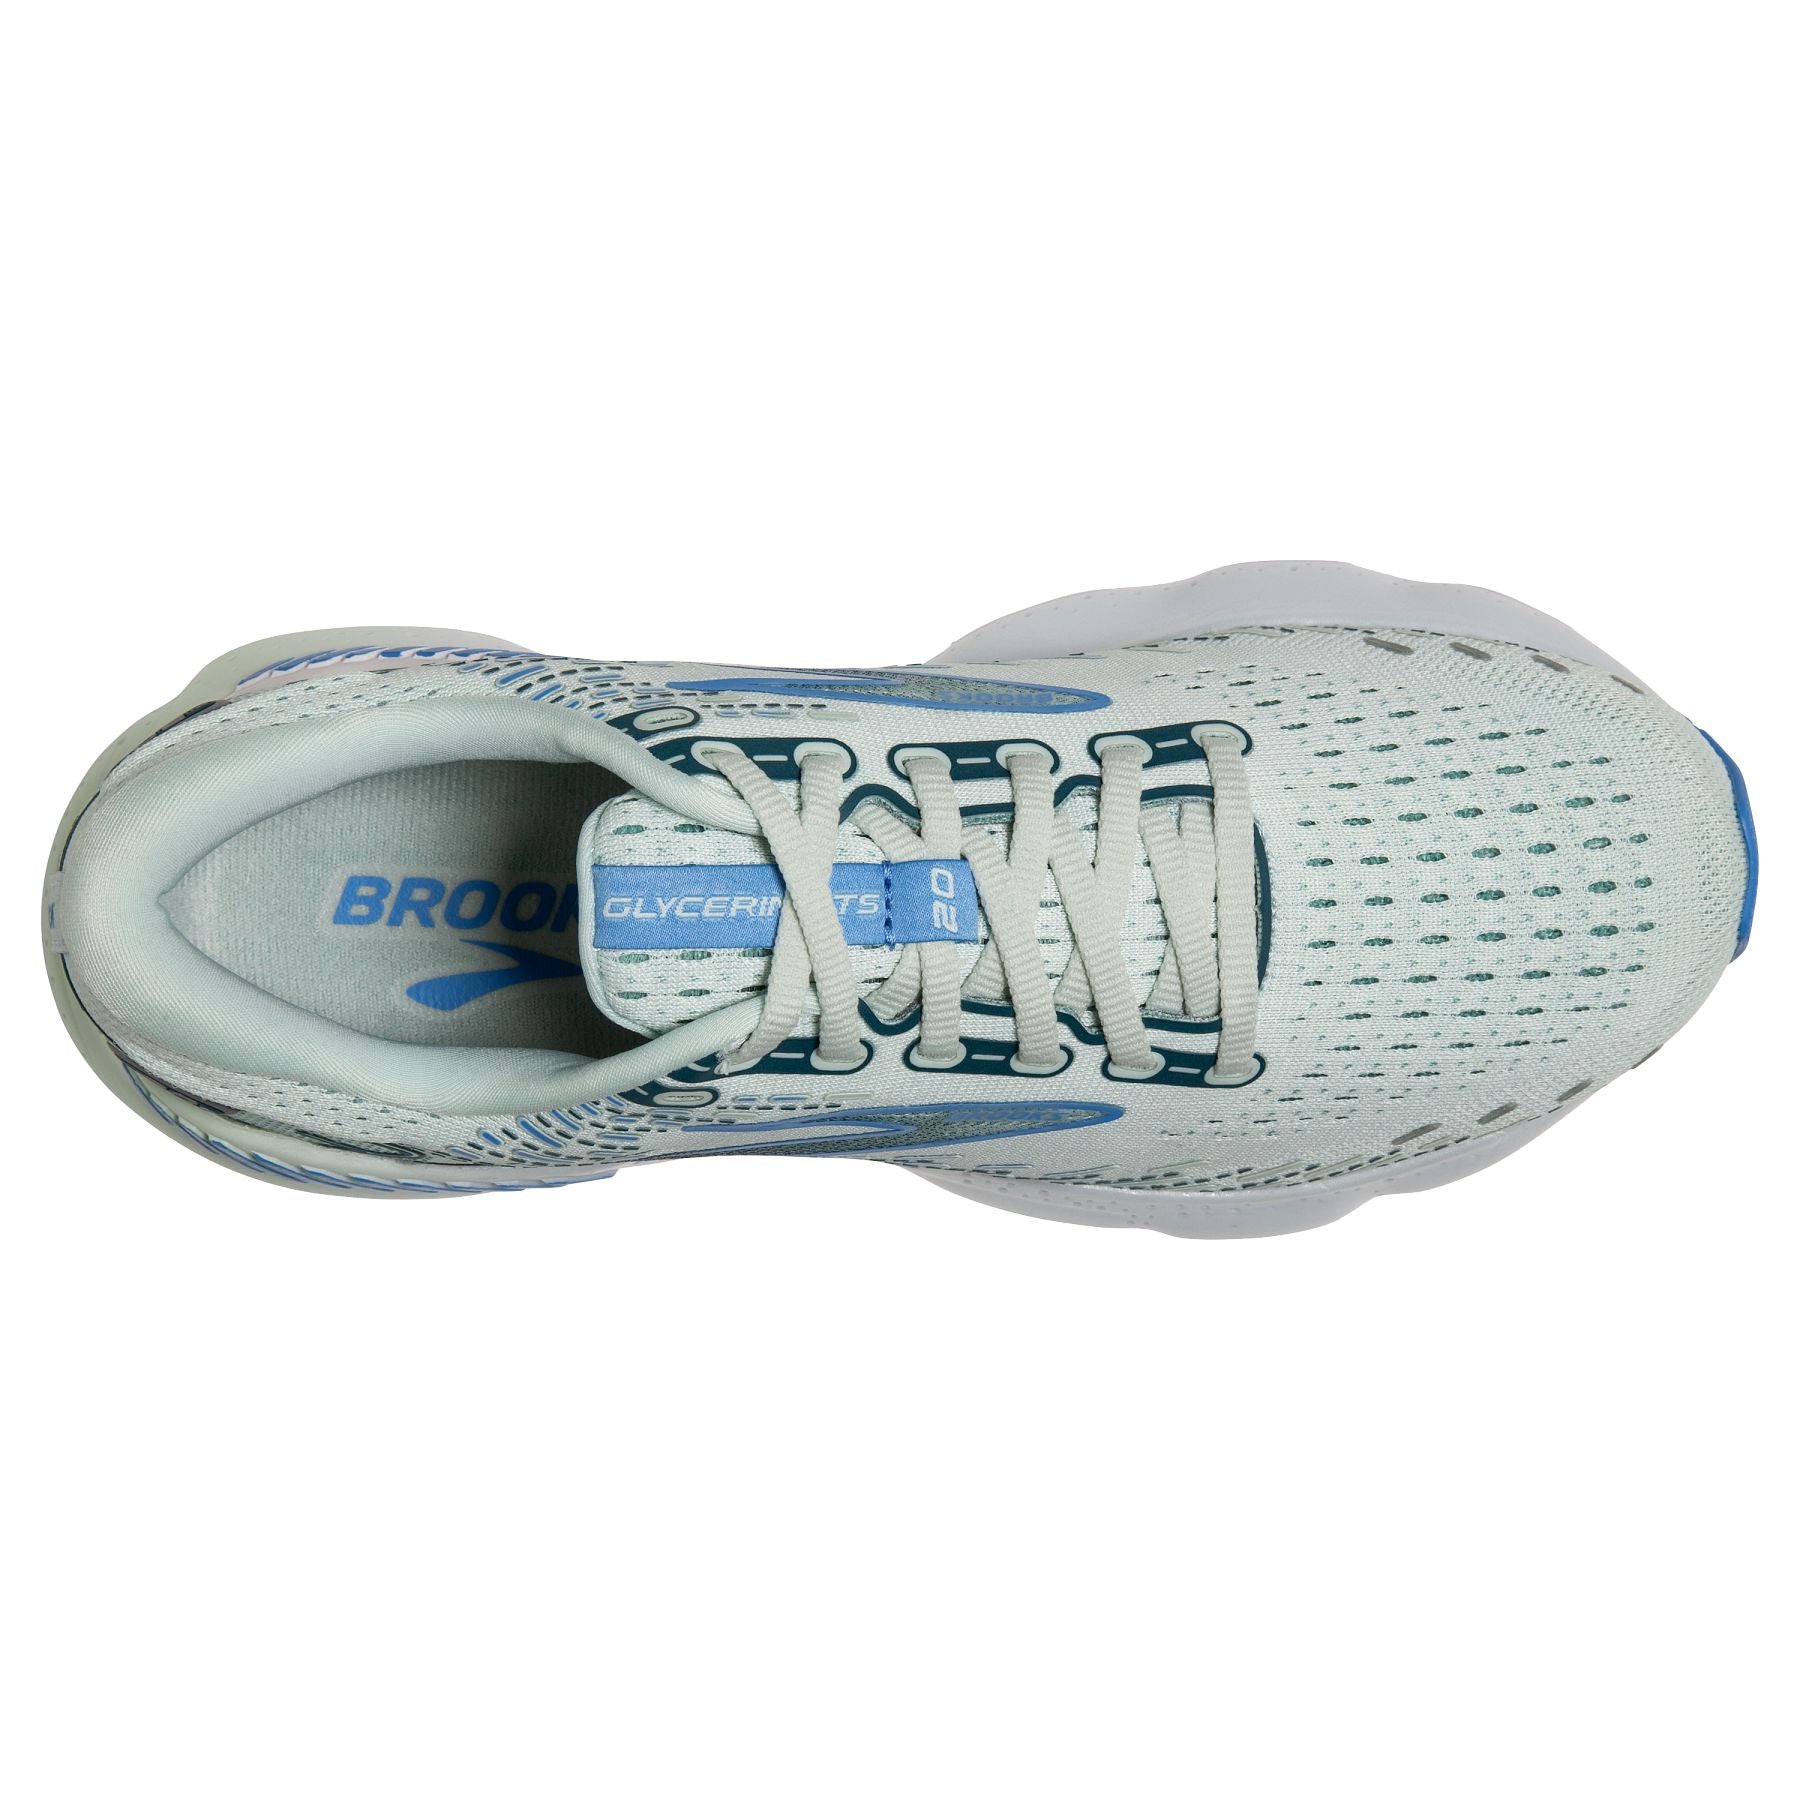 Top view of the Women's Glycerin GTS 20 by Brook's in the color Blue Glass/Marina/Legion Blue